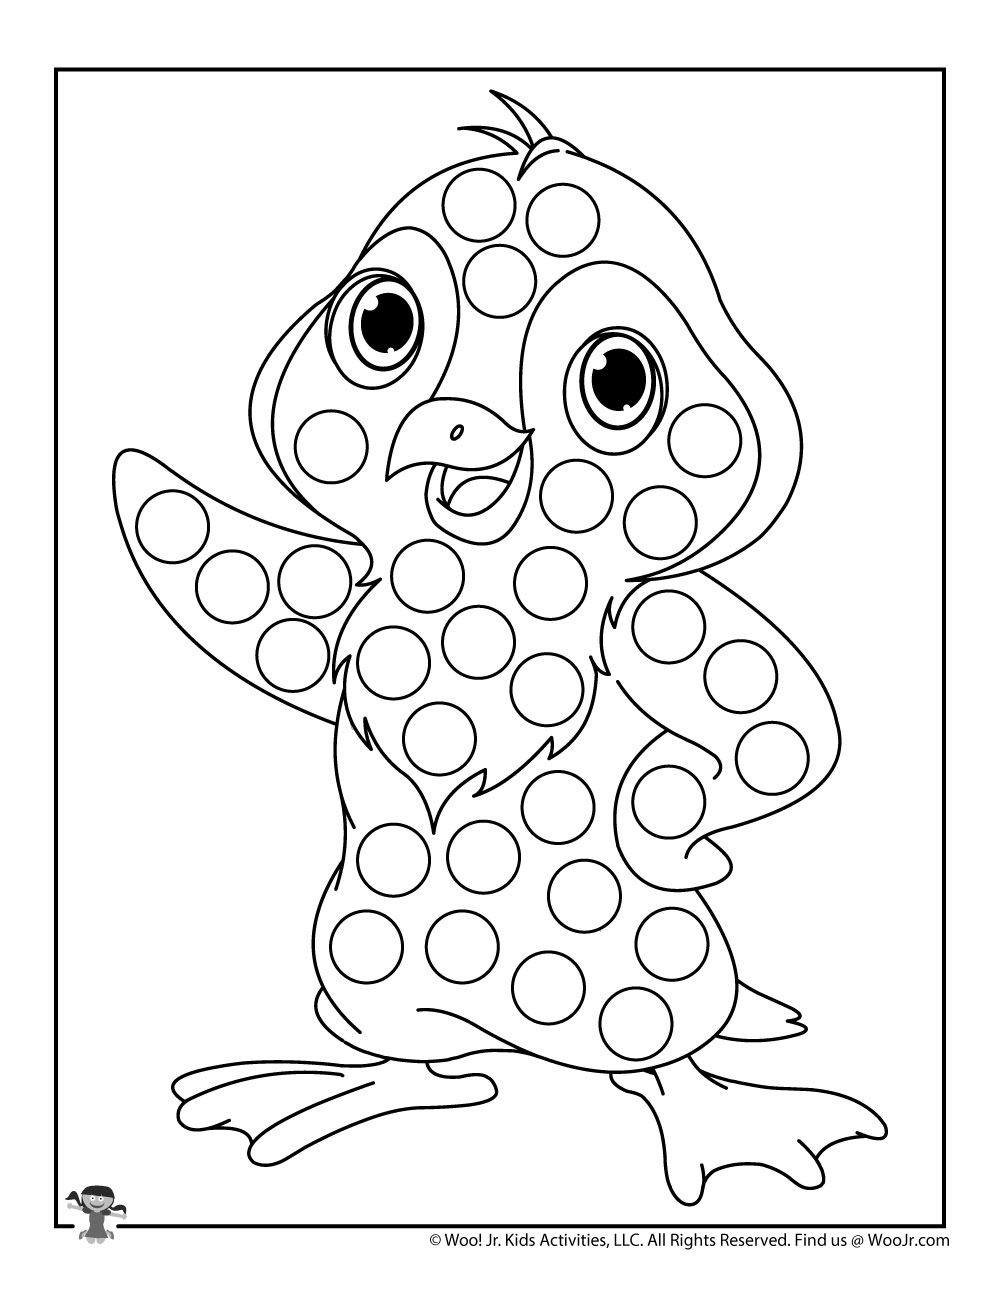 Penguin Do A Dot Printable Coloring Page For Kids. Woo! Jr. Kids